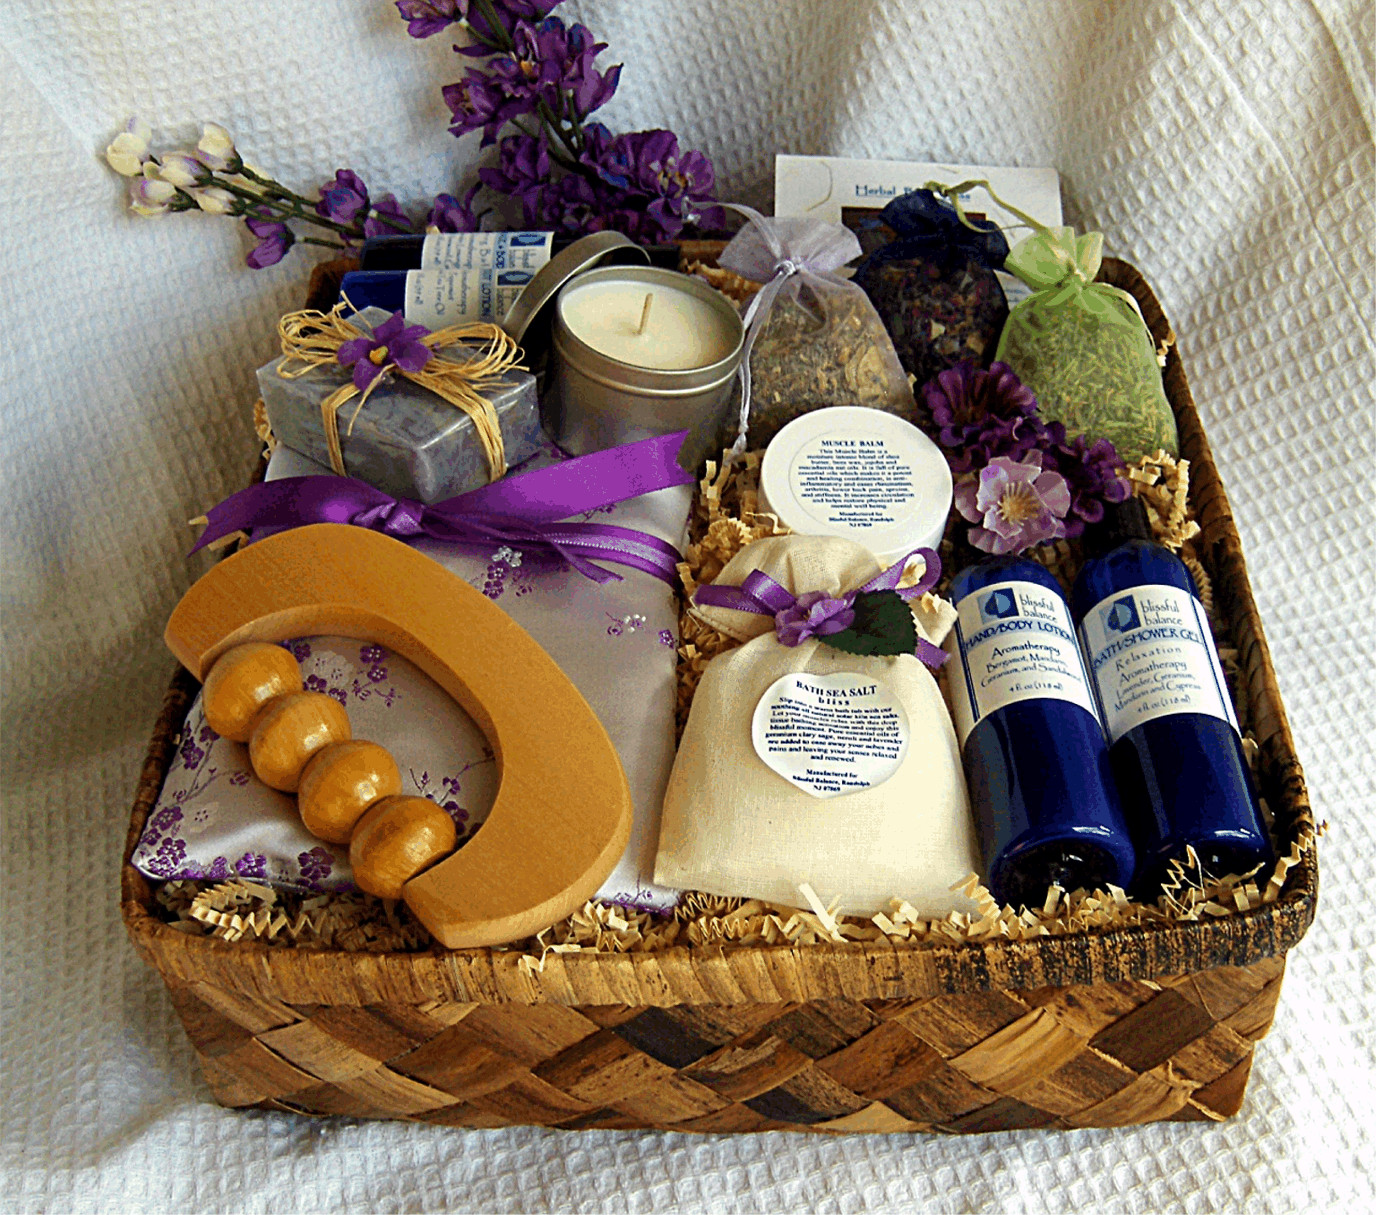 Good Gift Basket Ideas
 Wholesale Gift Basket Supplies and its types Product Reviews